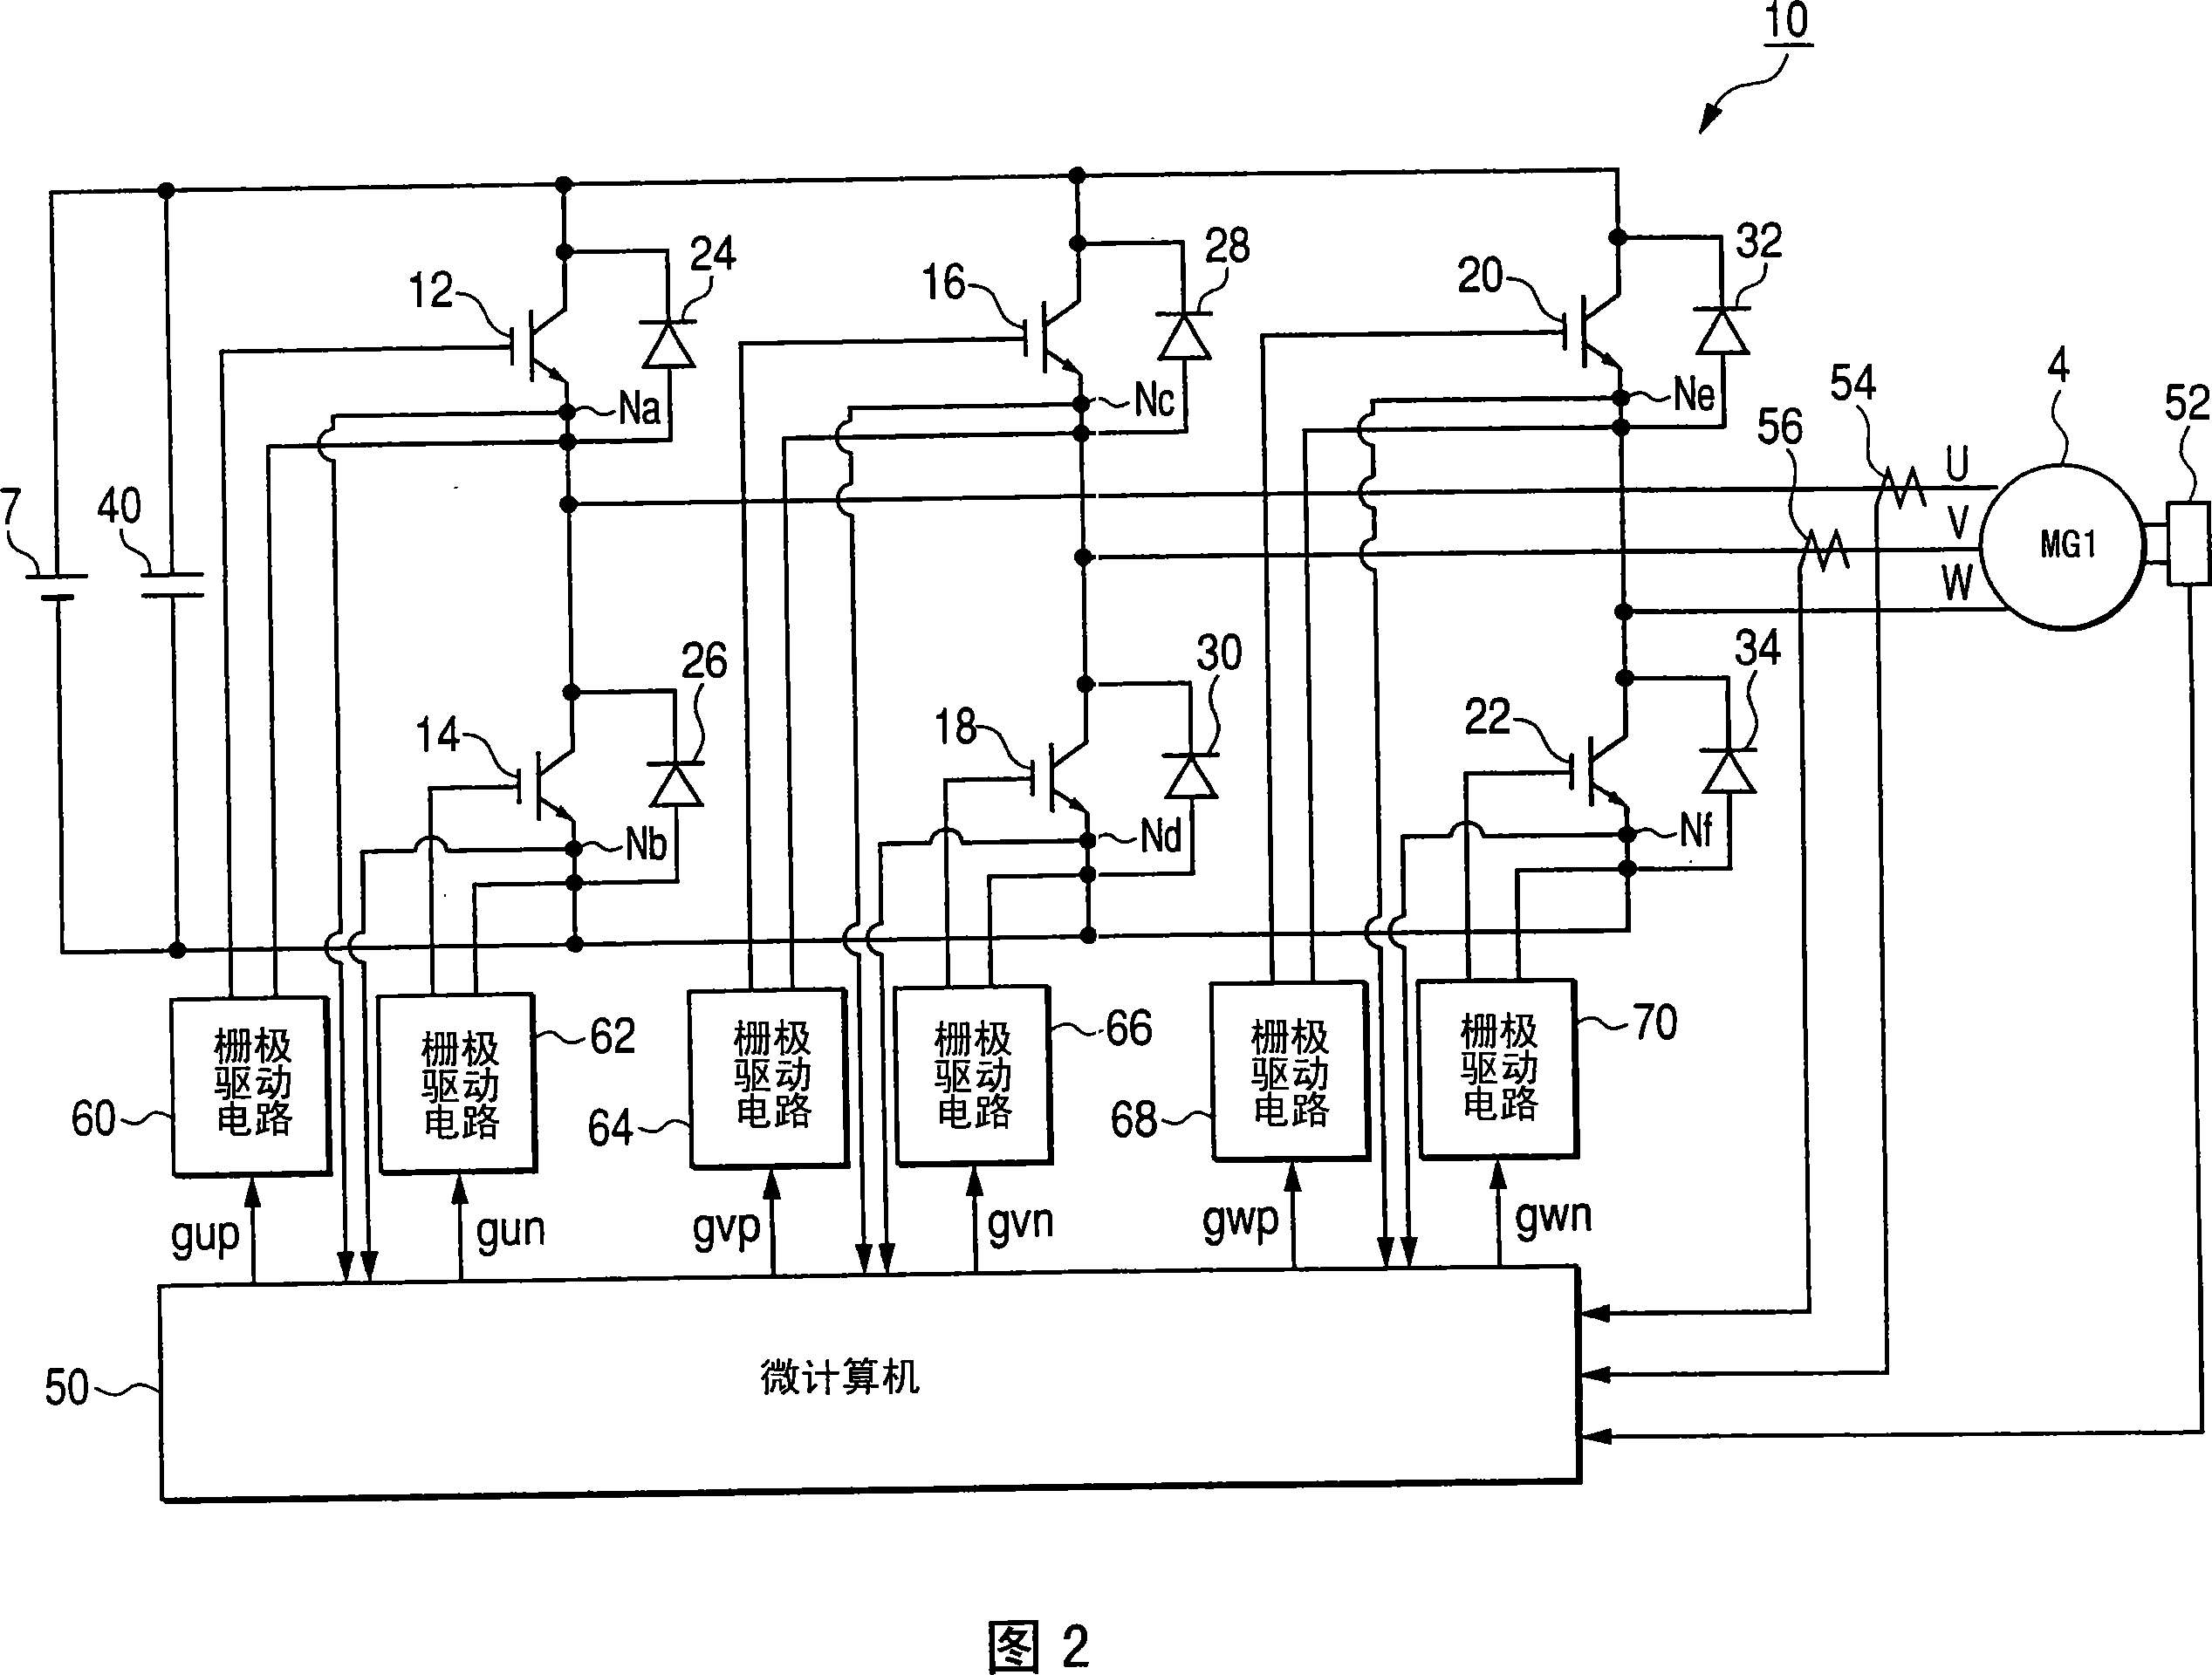 Control system for multiphase rotary electric machine